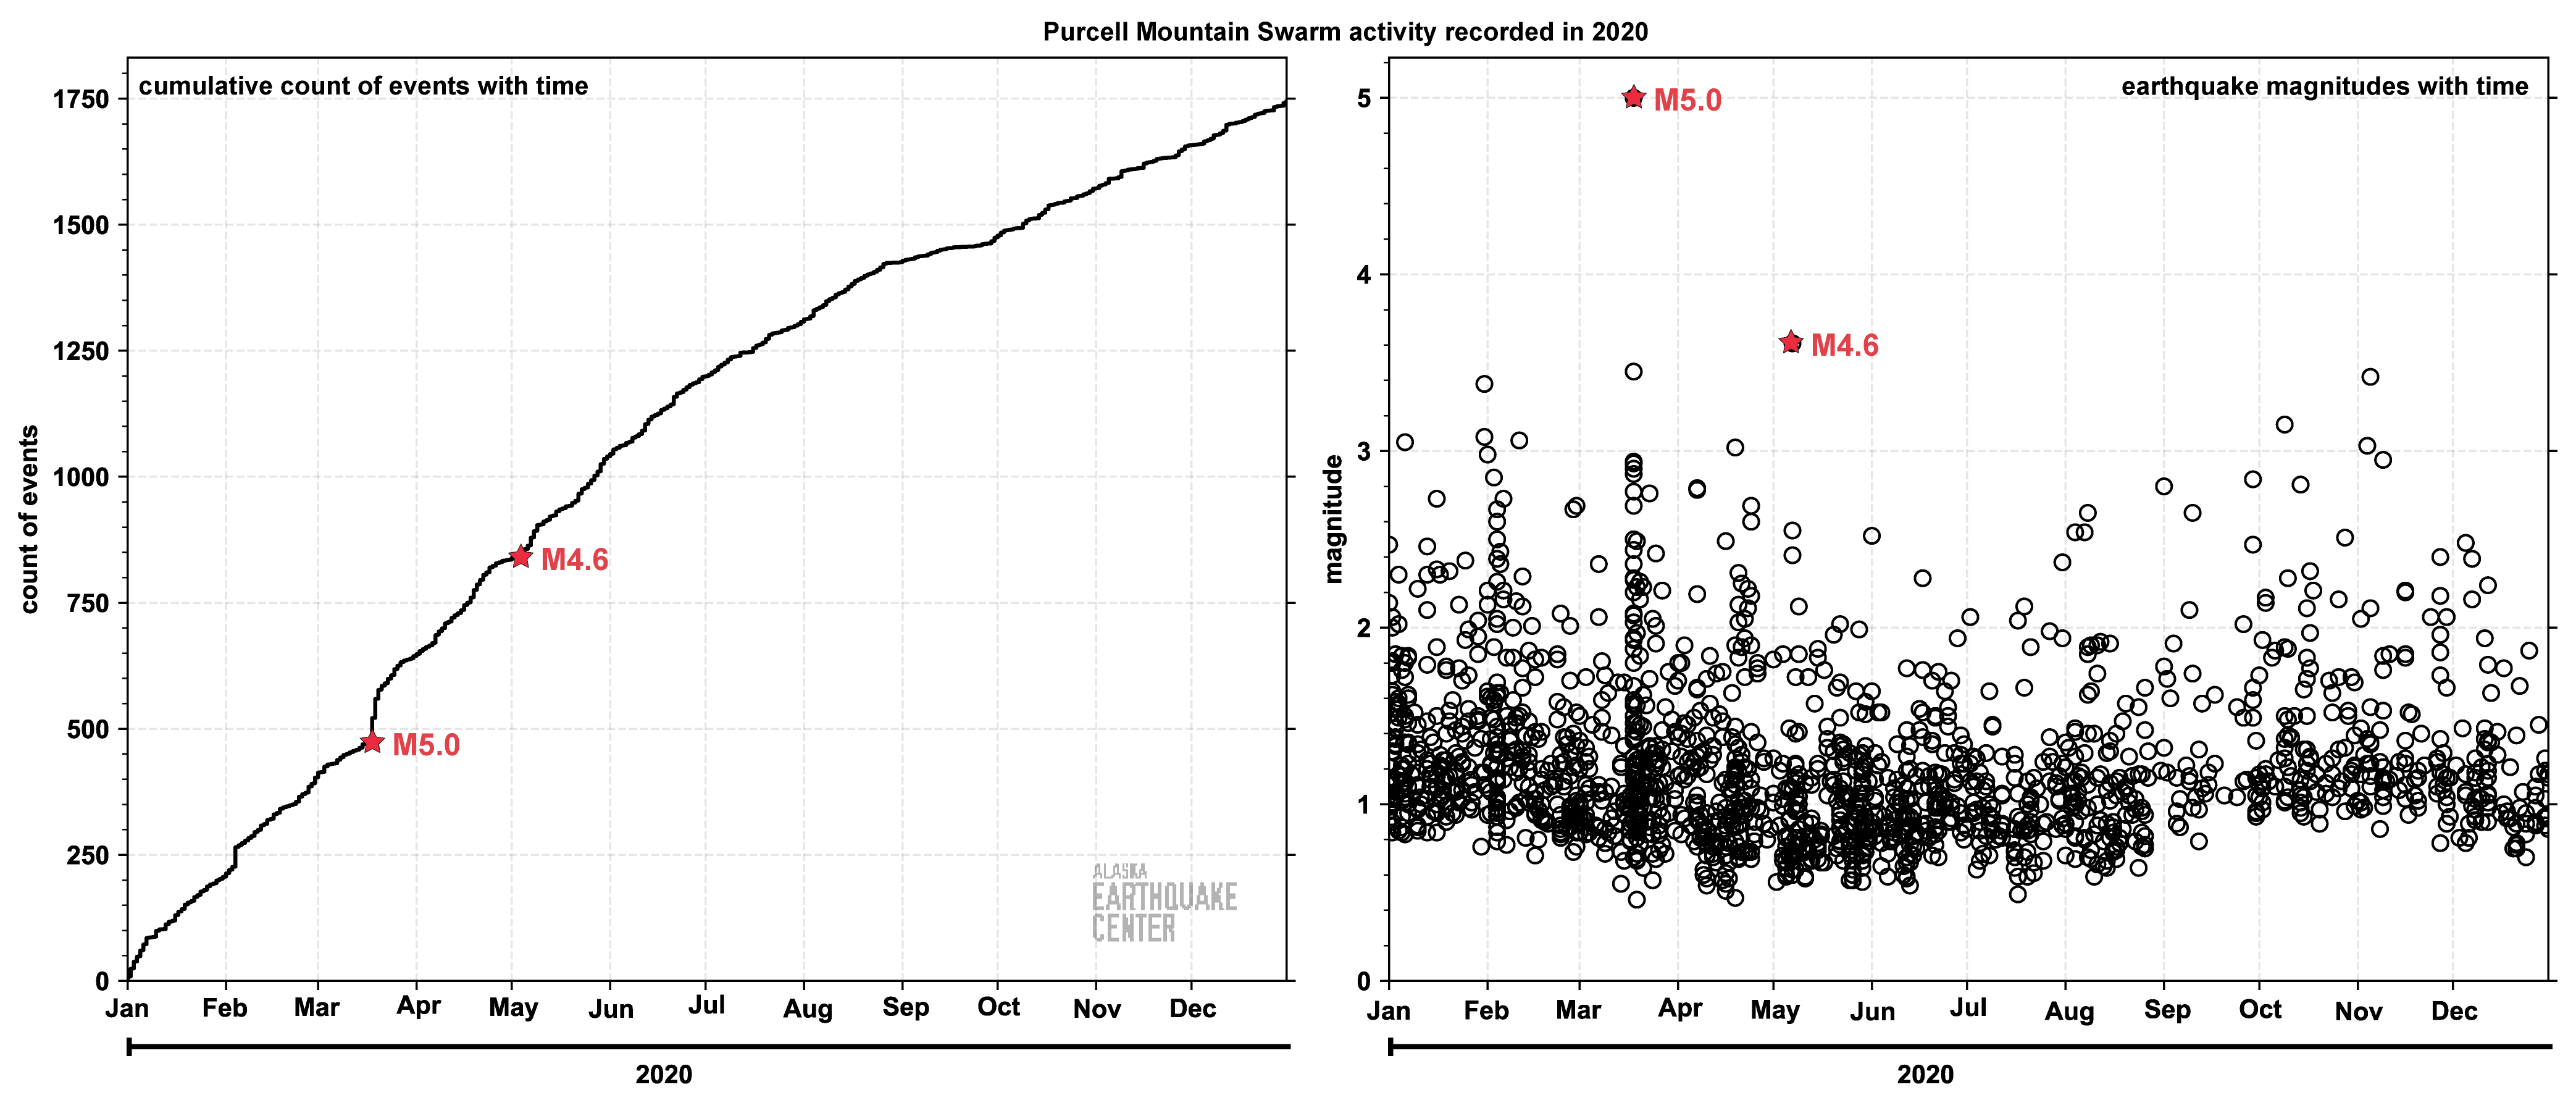 (L) The cumulative number of earthquakes in the Purcell Mountain swarm that occurred in 2020. (R) The magnitudes of the each earthquake in the sequence plotted in time.